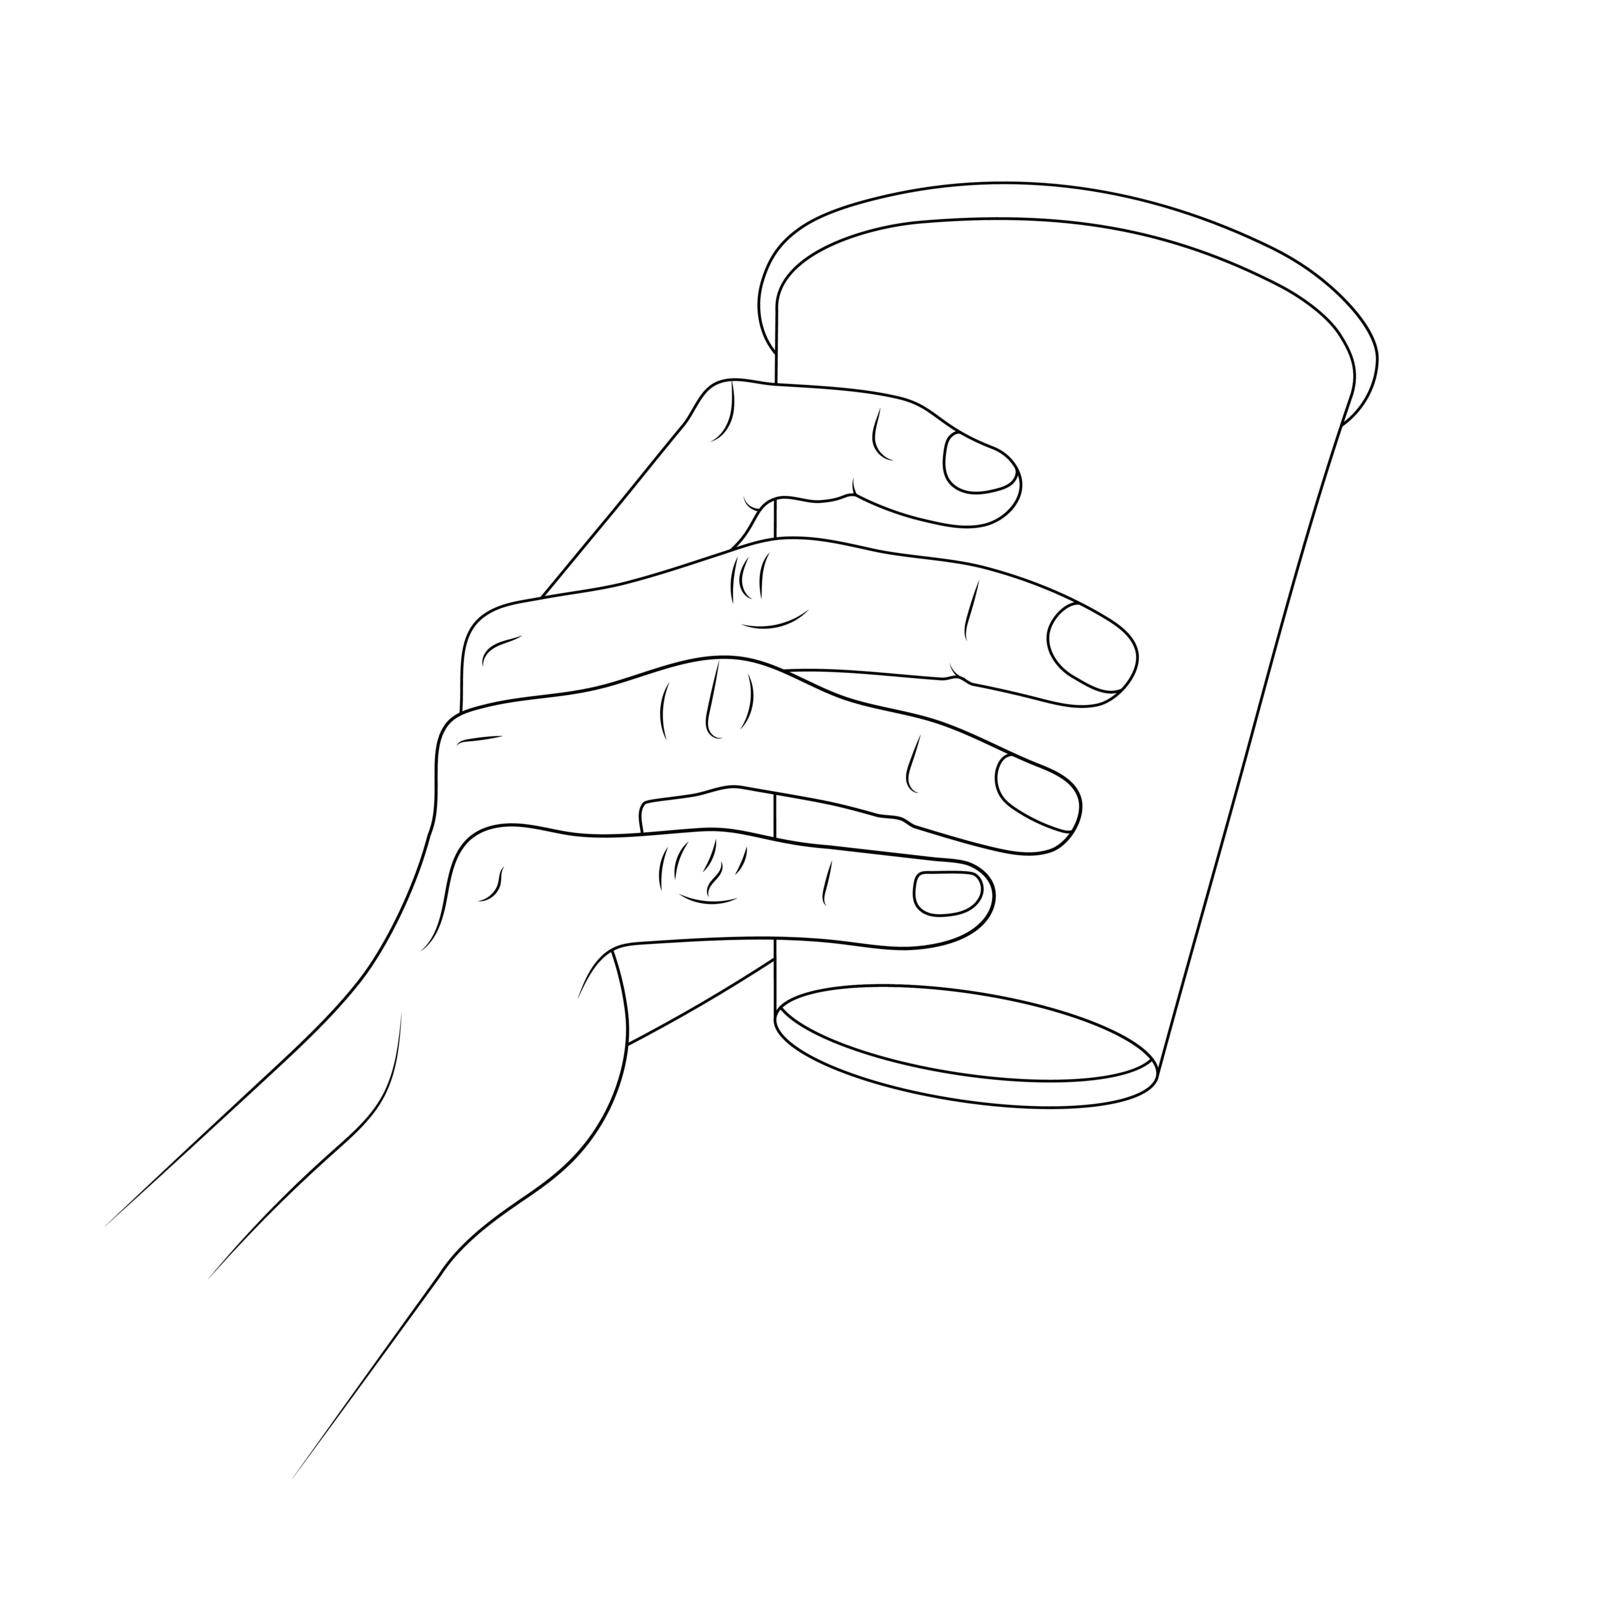 Disposable paper coffee cup in hand. Vector sketch illustration. by vas_evg